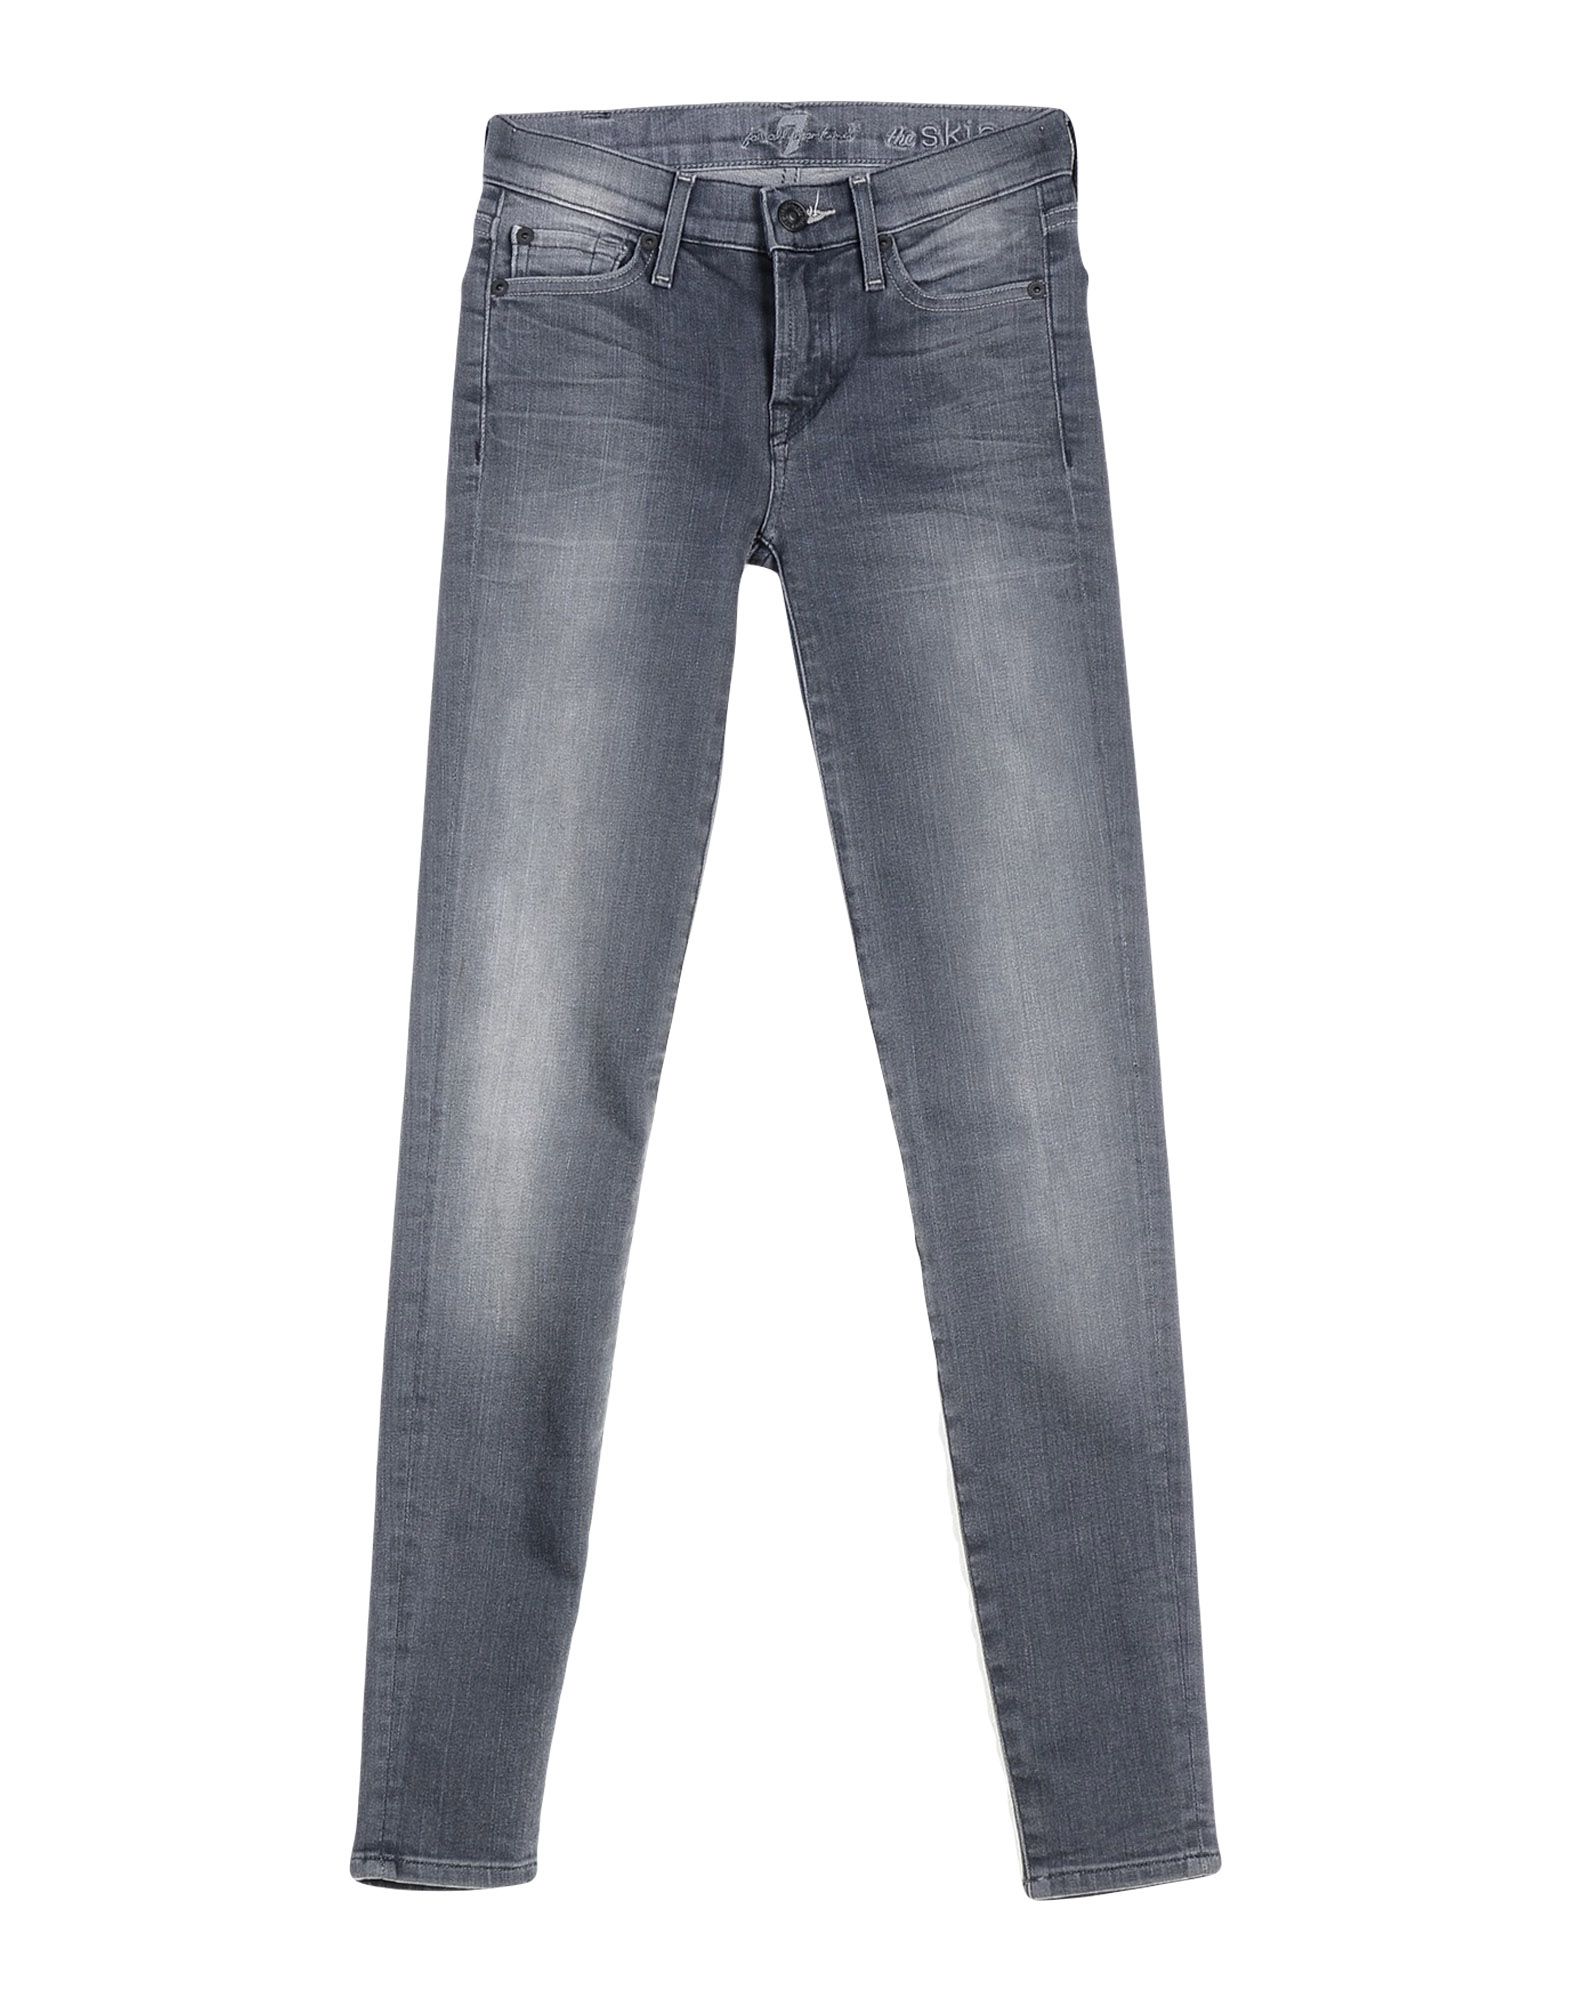 7 FOR ALL MANKIND Denim pants,42666545DF 14